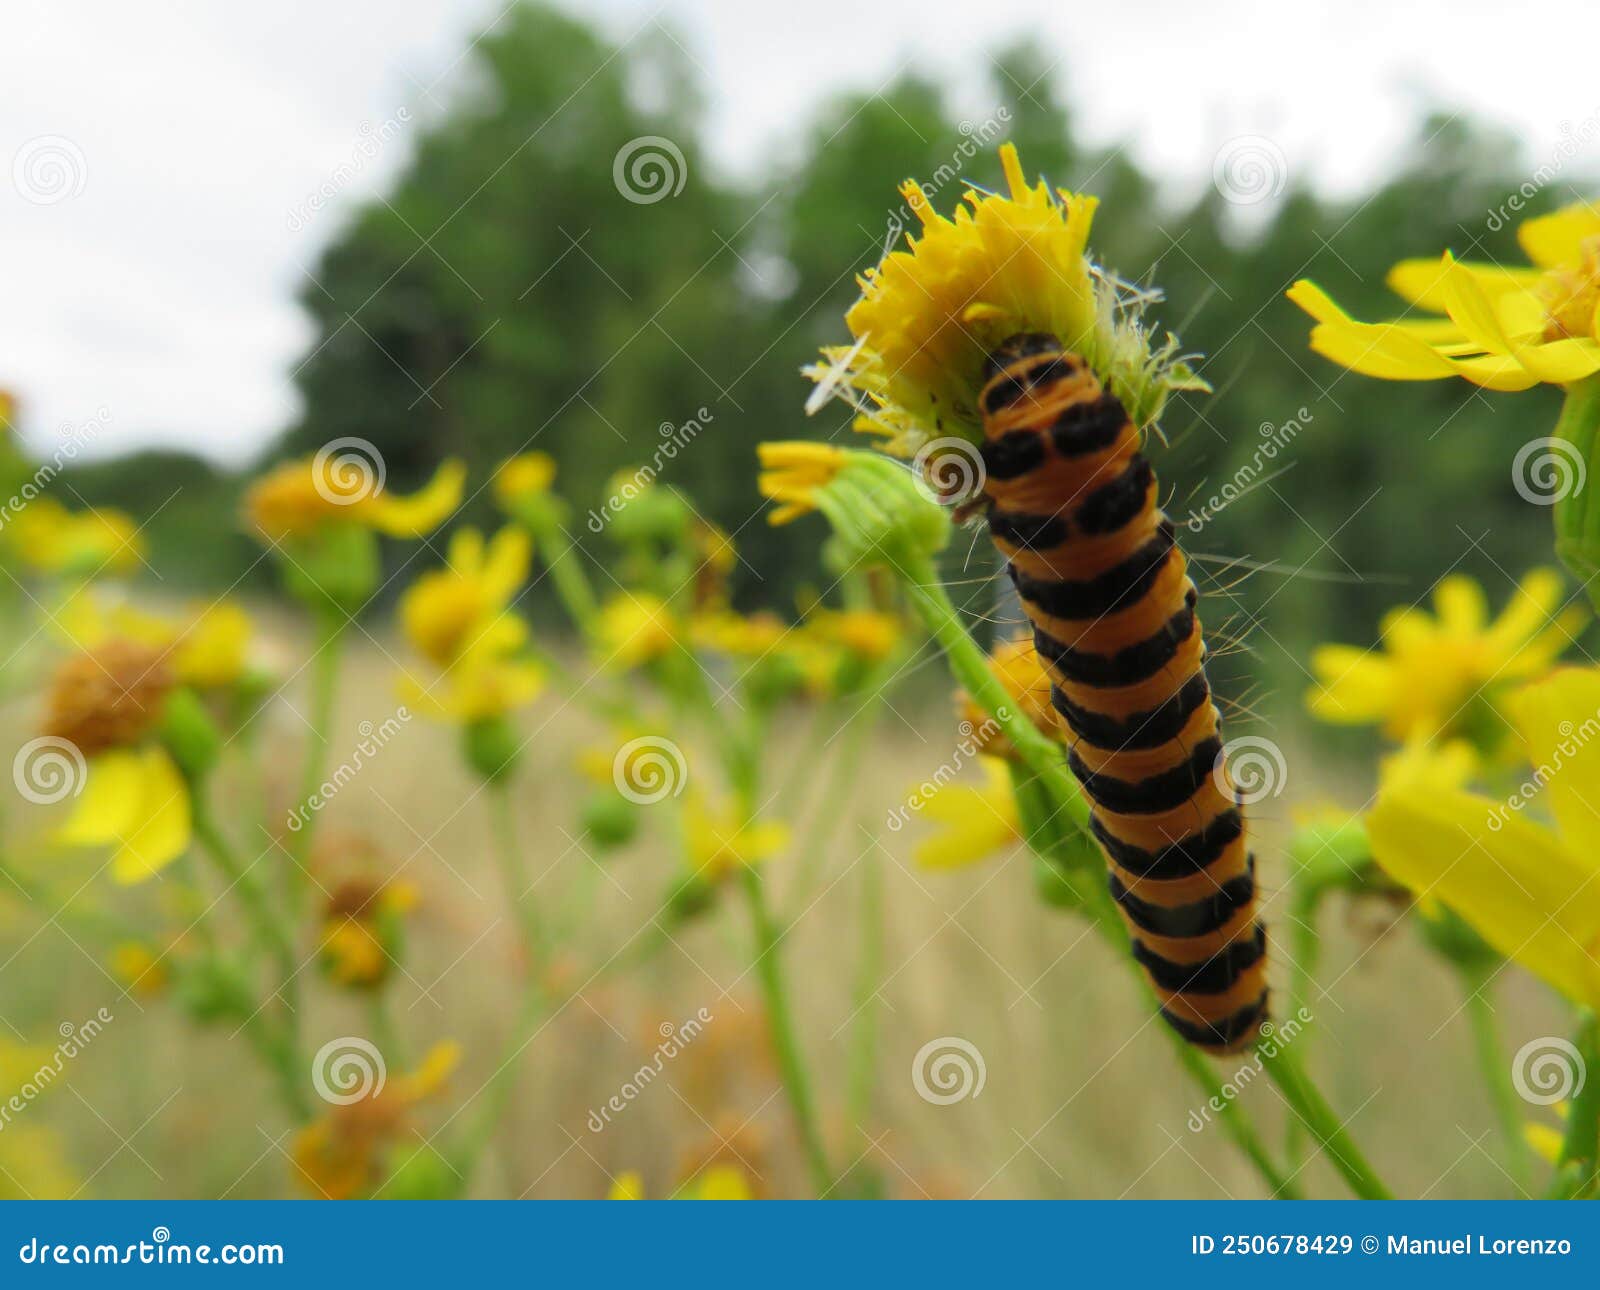 animal caterpillar insect flower food pest disgusting colors